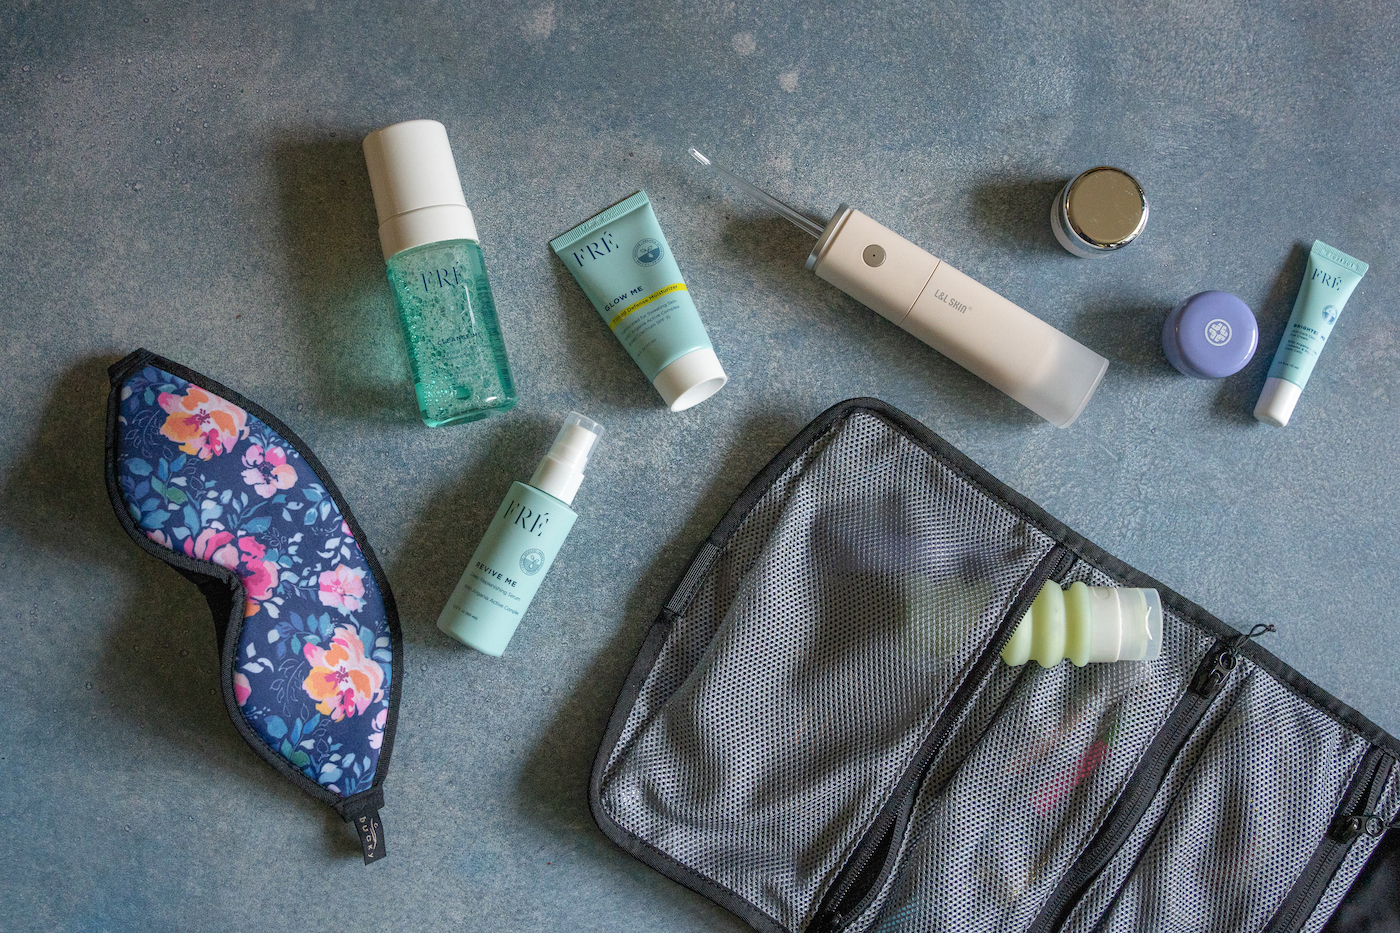 What goes into a toiletry bag checklist